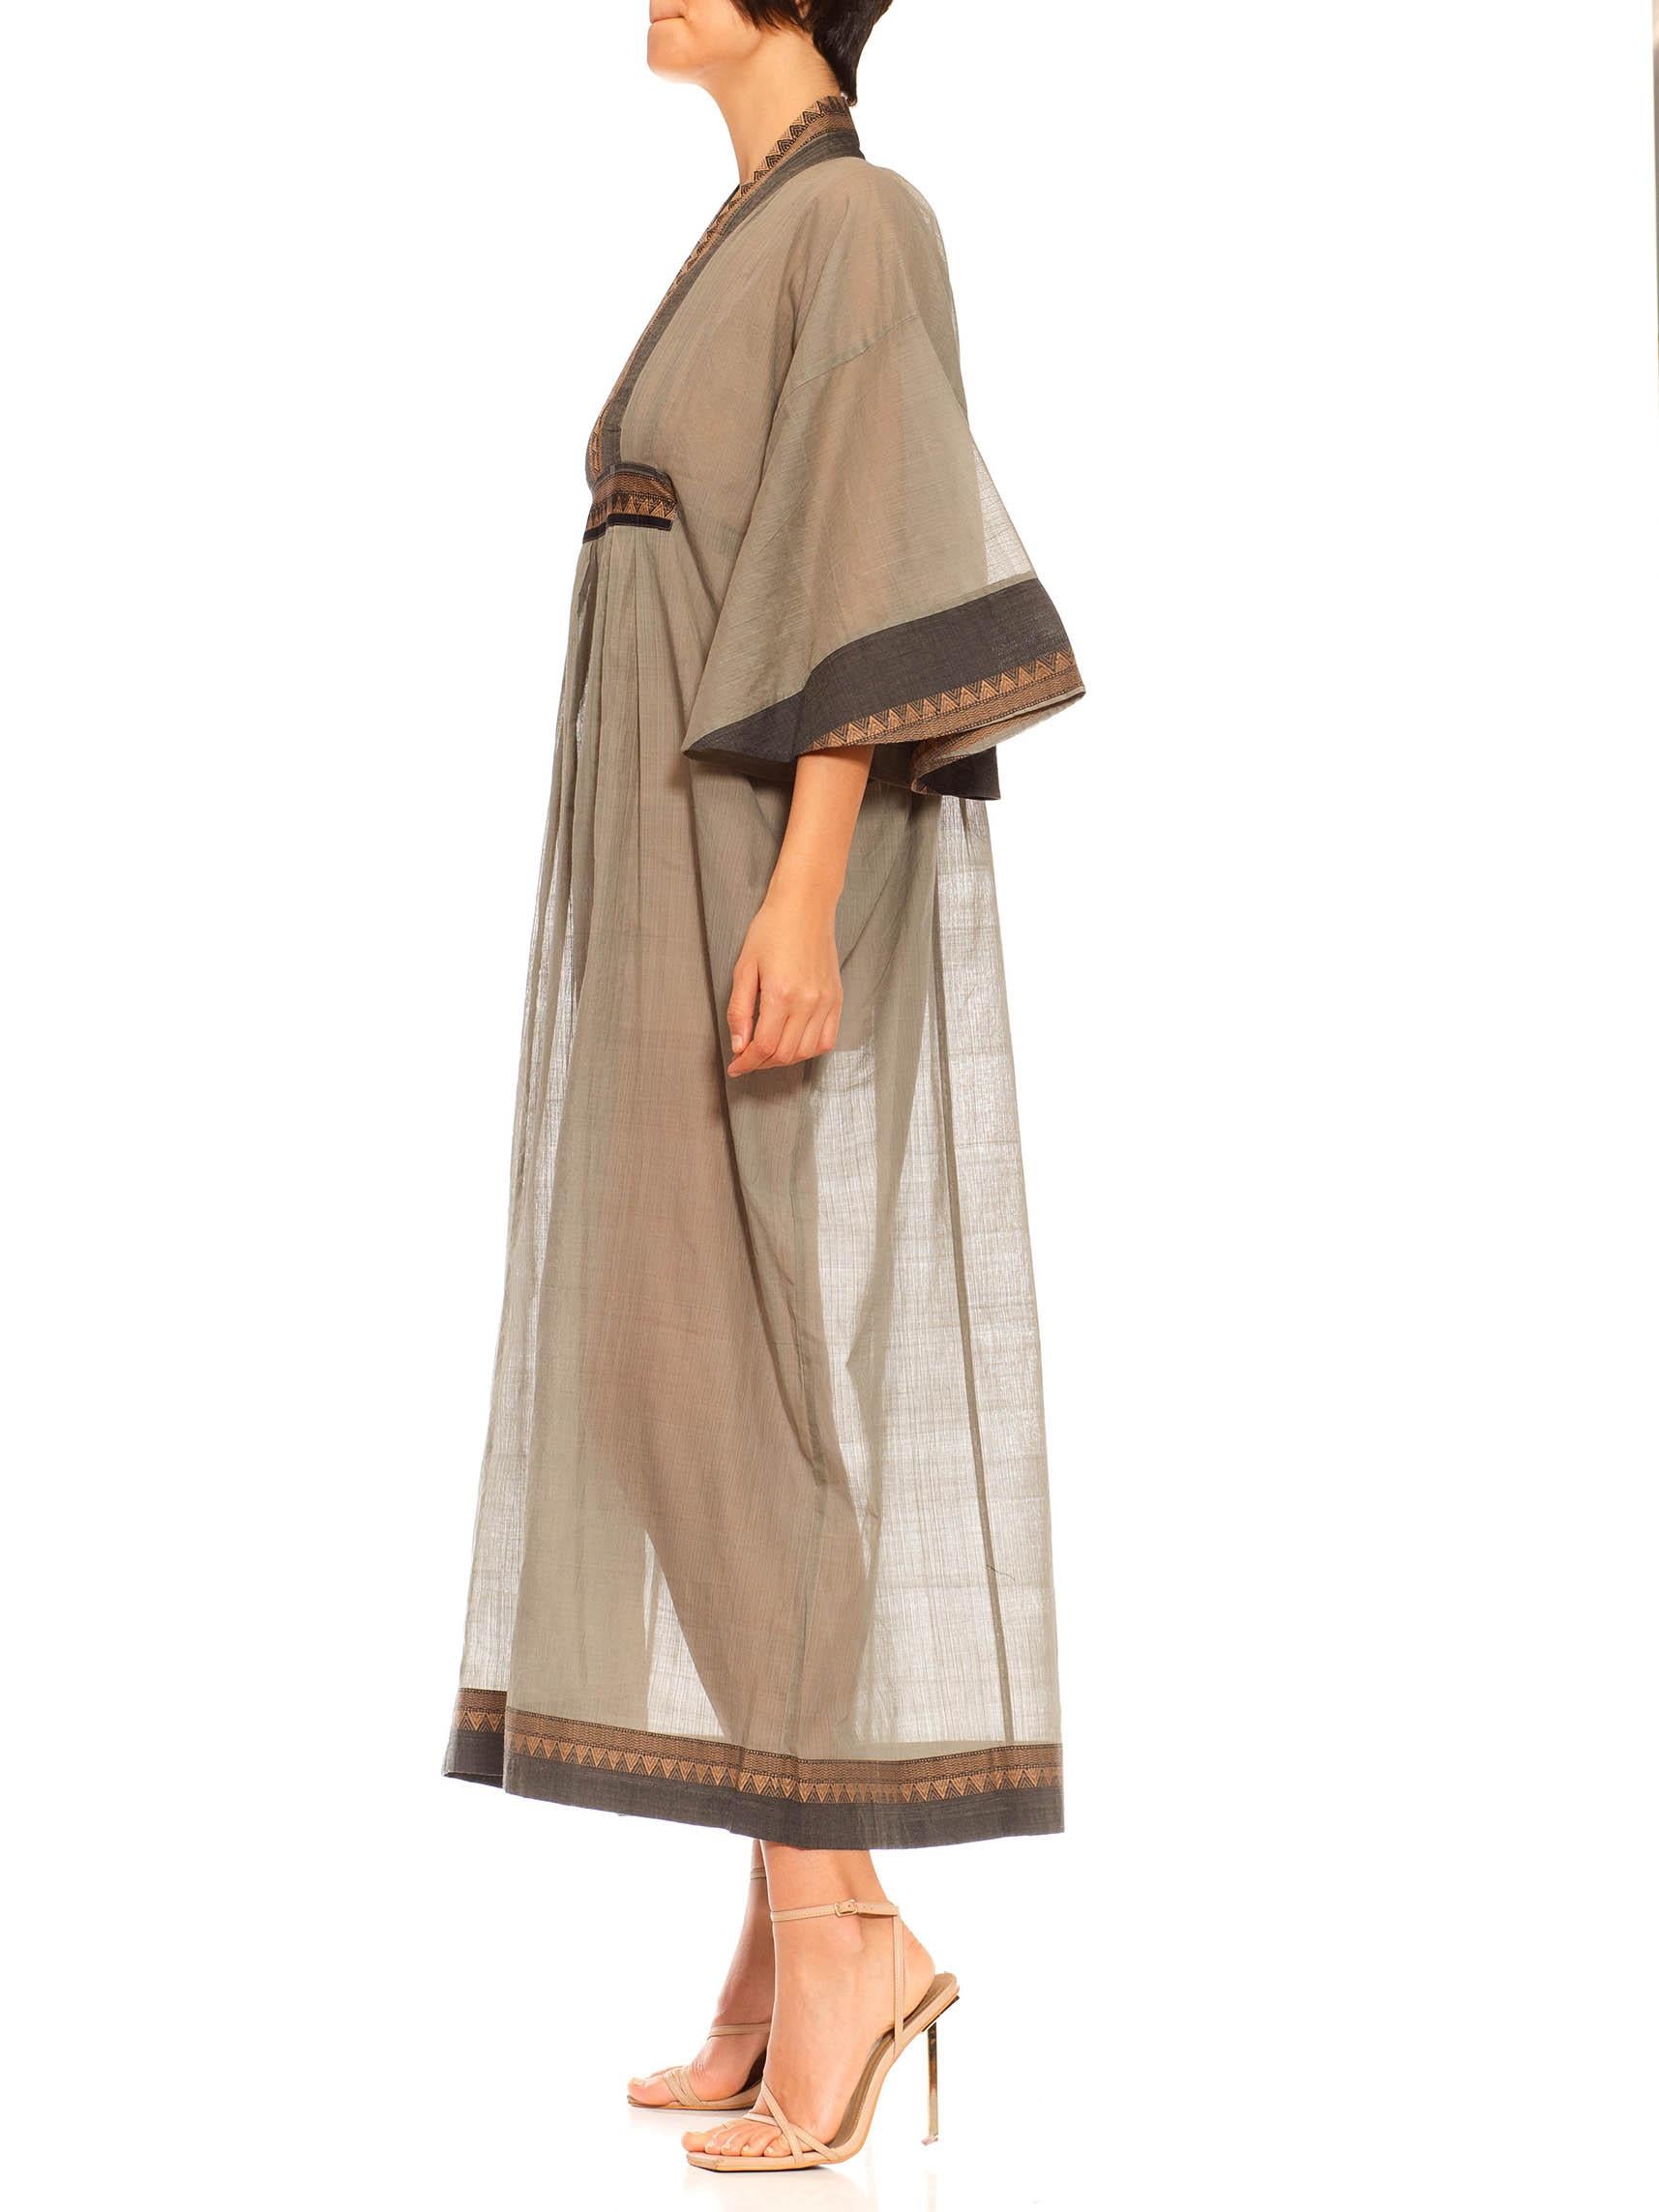 Morphew Collection Sage & Black Silk Kaftan Made From Vintage Saris
MORPHEW COLLECTION is made entirely by hand in our NYC Ateliér of rare antique materials sourced from around the globe. Our sustainable vintage materials represent over a century of